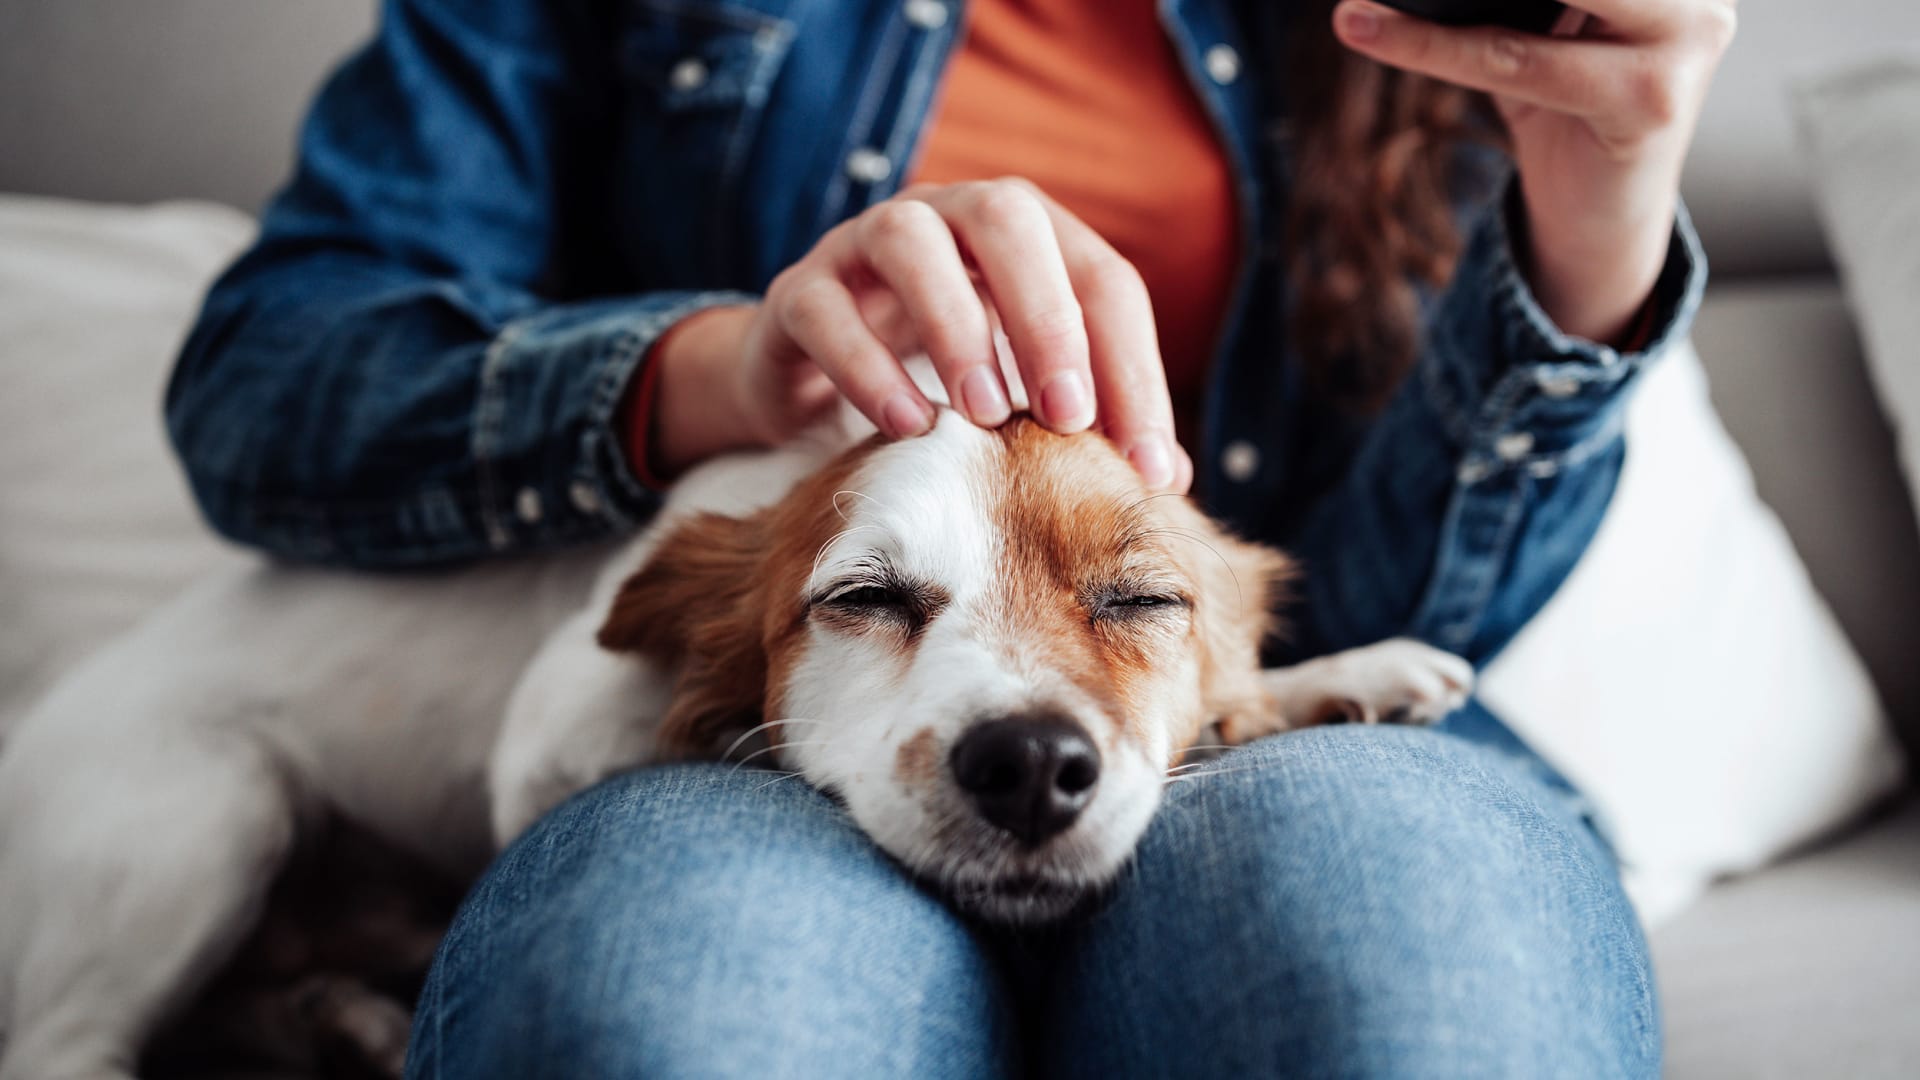 Neuroscience Says People With Dogs Get These 5 Big Brain Benefits